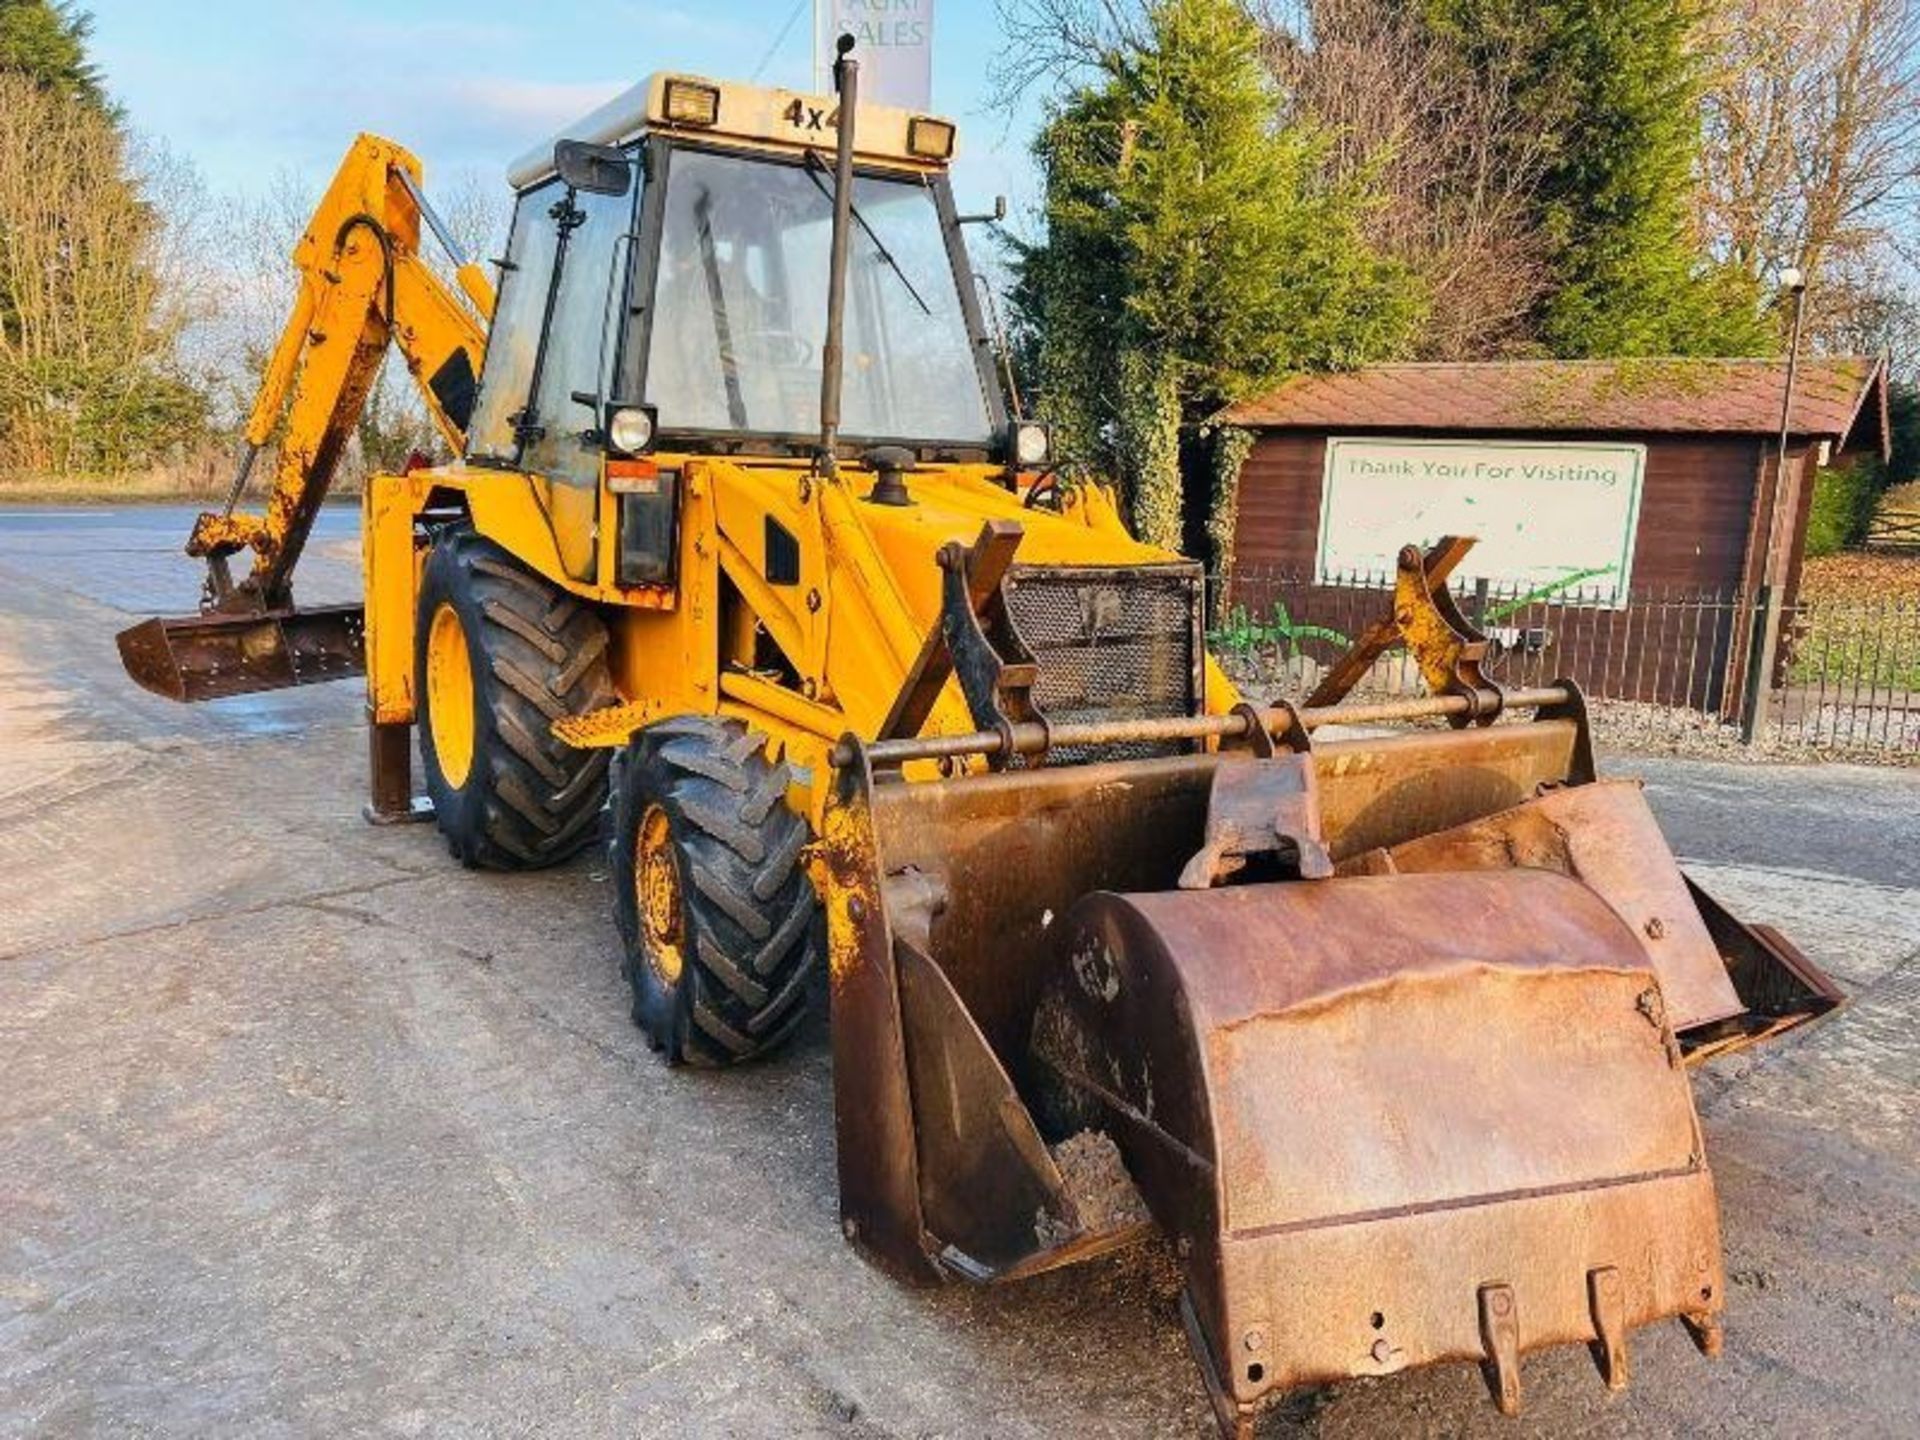 JCB 3CX PROJECT 7 4WD BACKHOE DIGGER C/W 4 X BUCKETS - Image 10 of 10